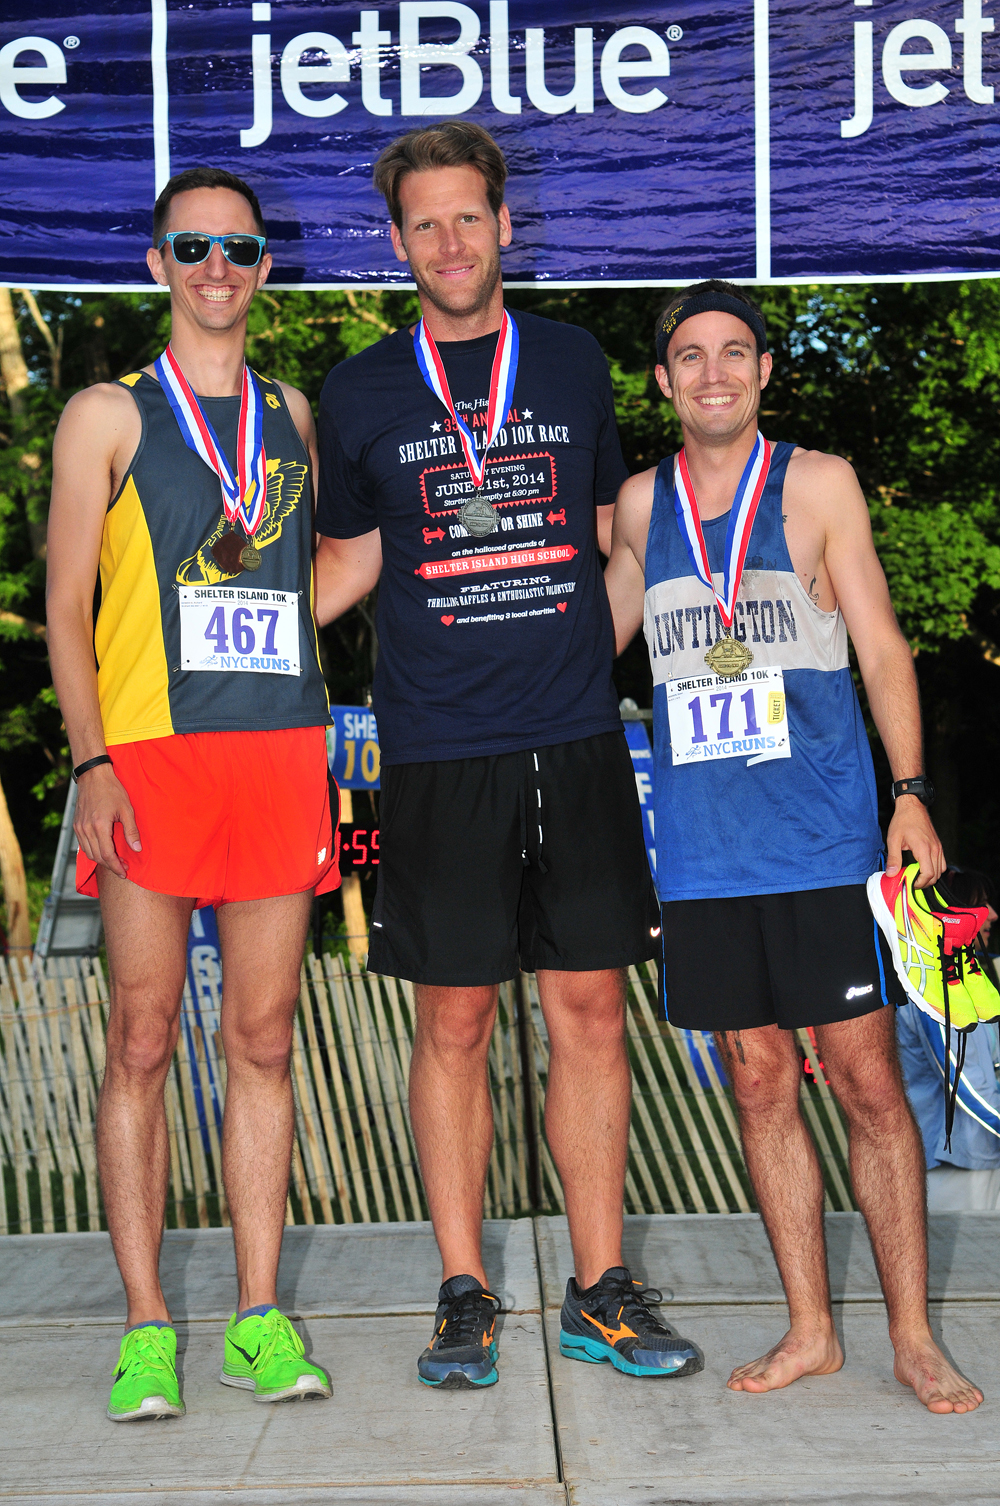 Richard Dower of Brooklyn (from left to right) was third place in the male 30-34 age group, following Gregory Thayer of Gorham, Maine and Shawn Anderson of Huntington Station. (Credit: Bill Landon)